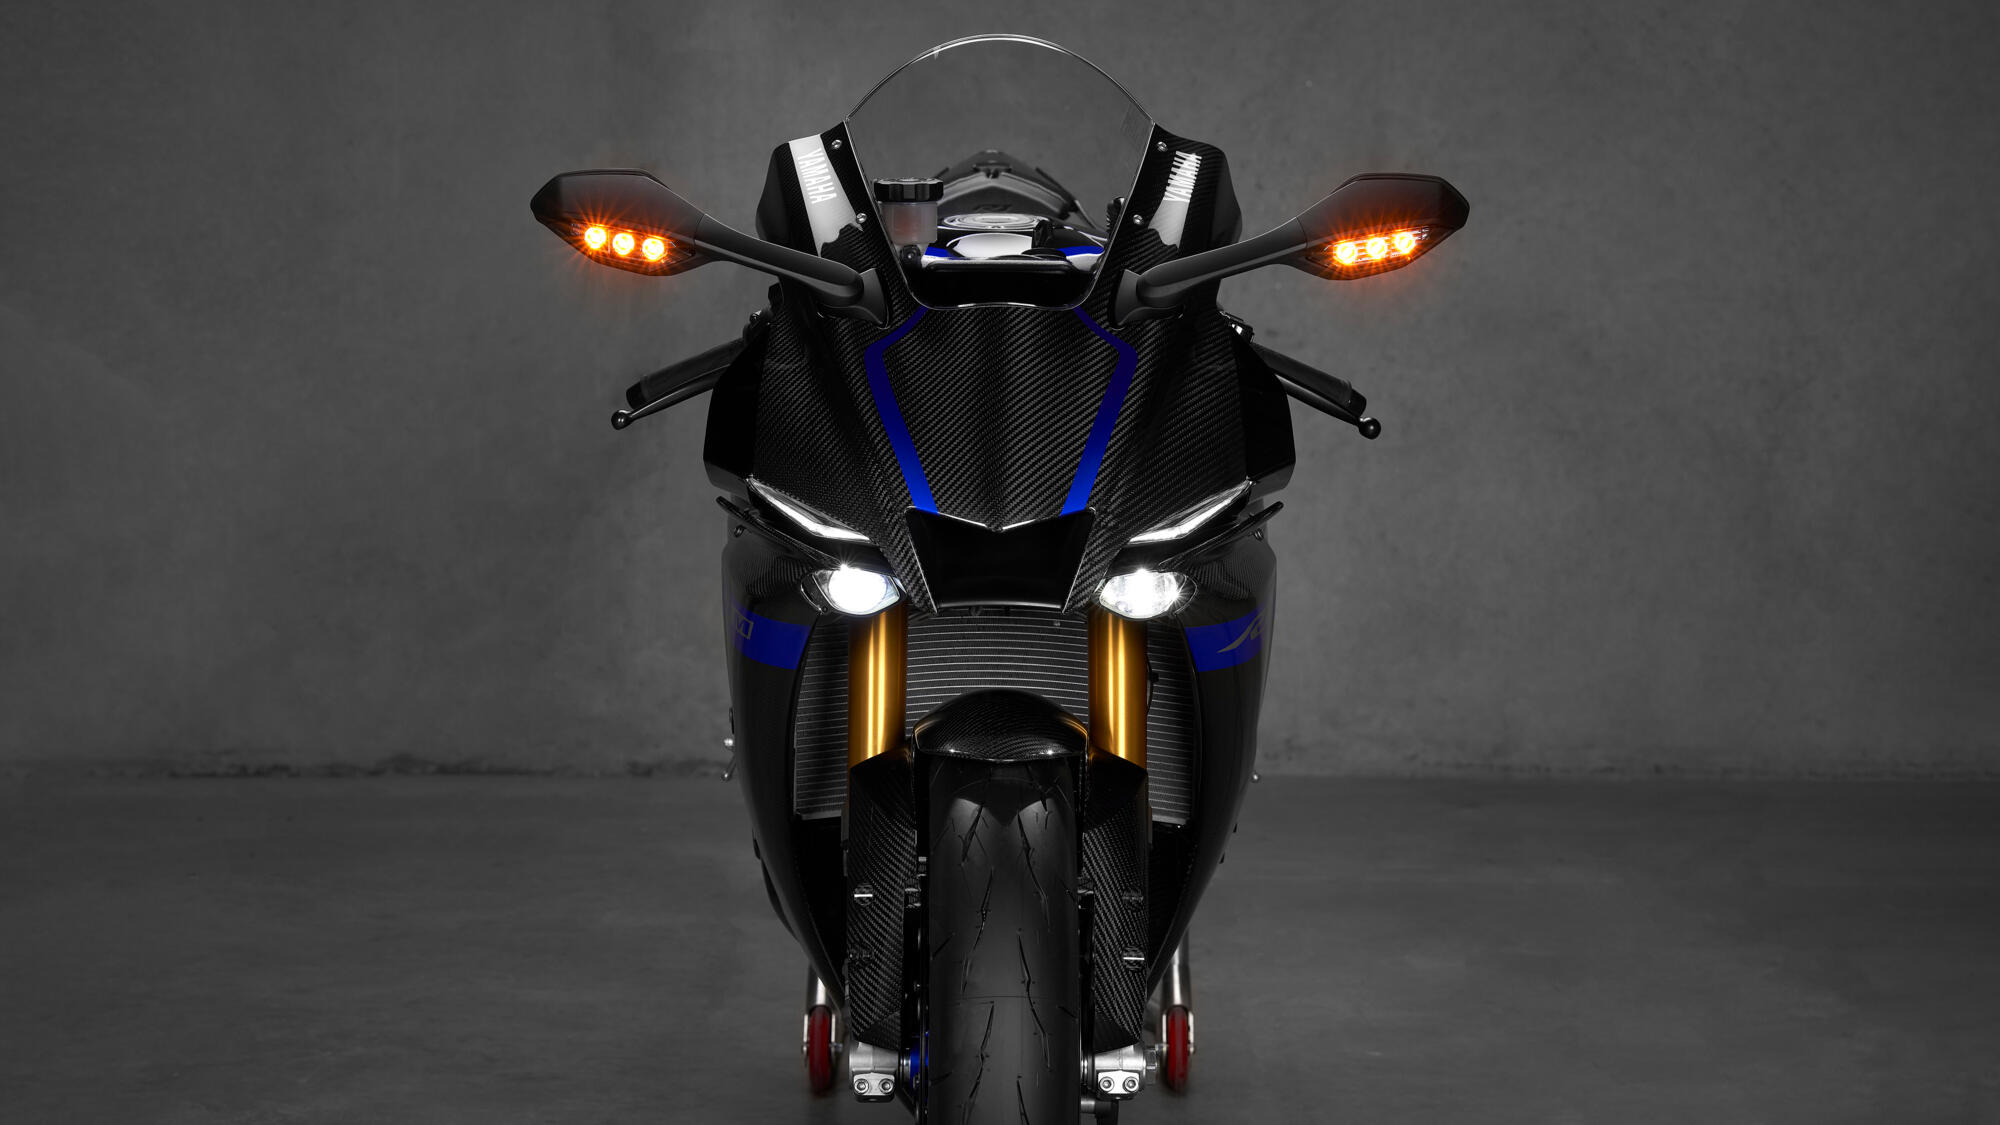 Next generation Yamaha R1 to arrive by end of the year?